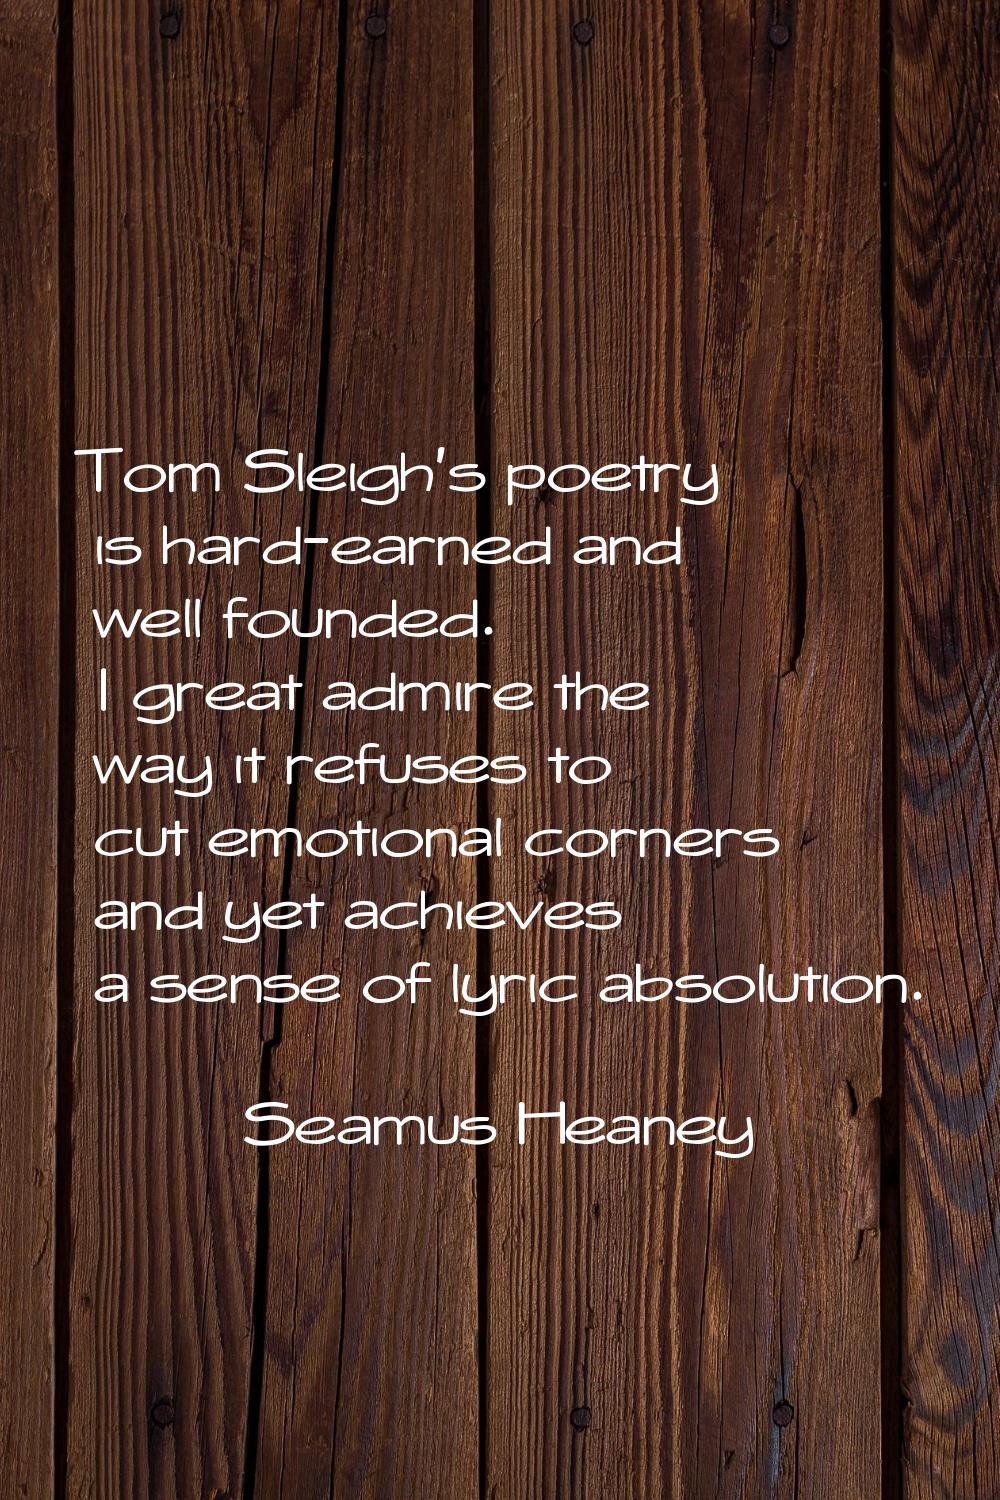 Tom Sleigh's poetry is hard-earned and well founded. I great admire the way it refuses to cut emoti